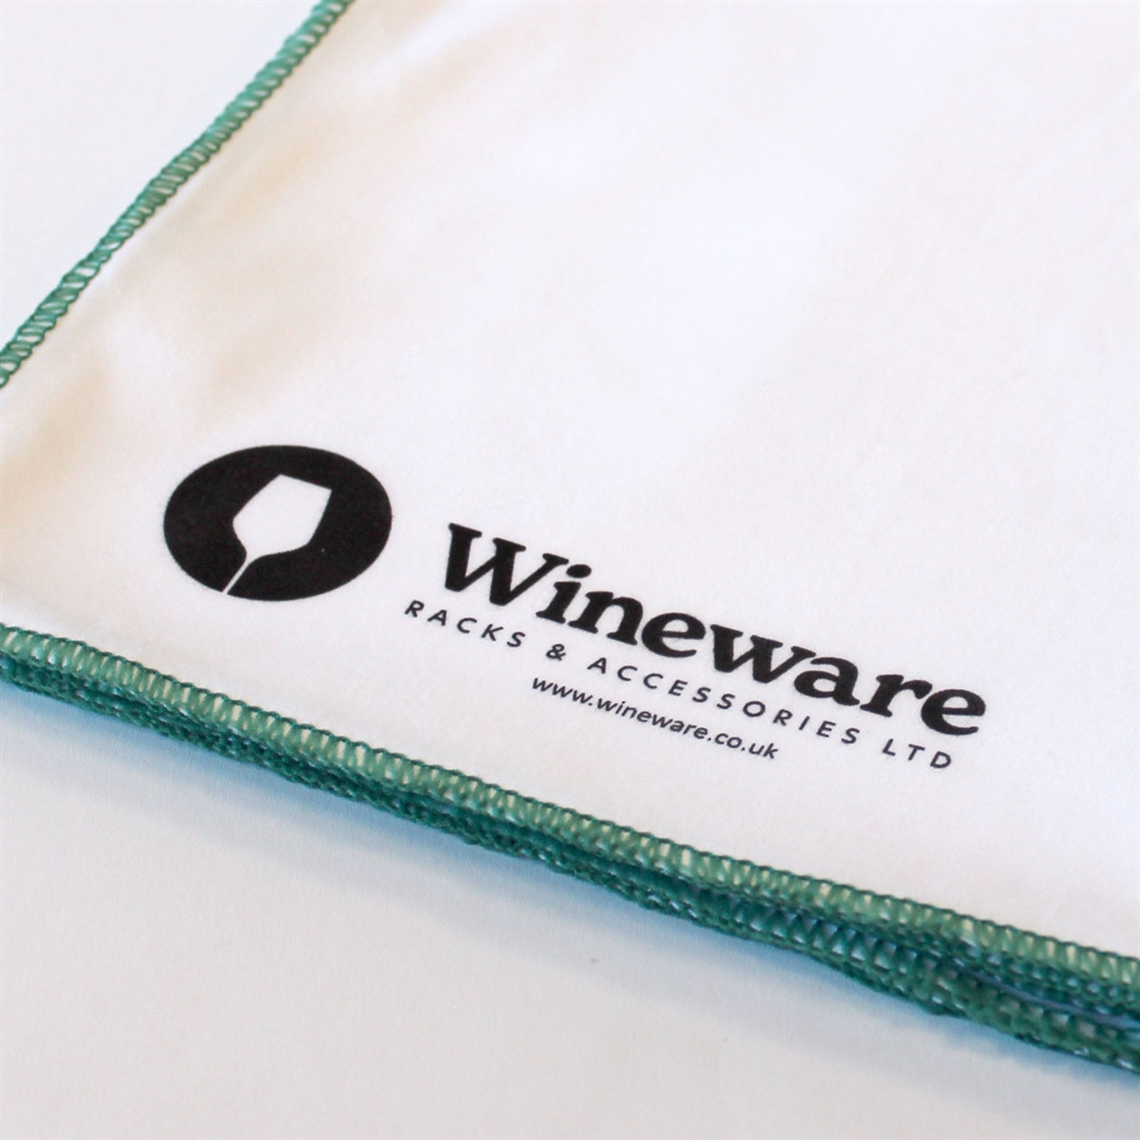 View more wine funnels / aerators from our Wine Decanter Cleaning range